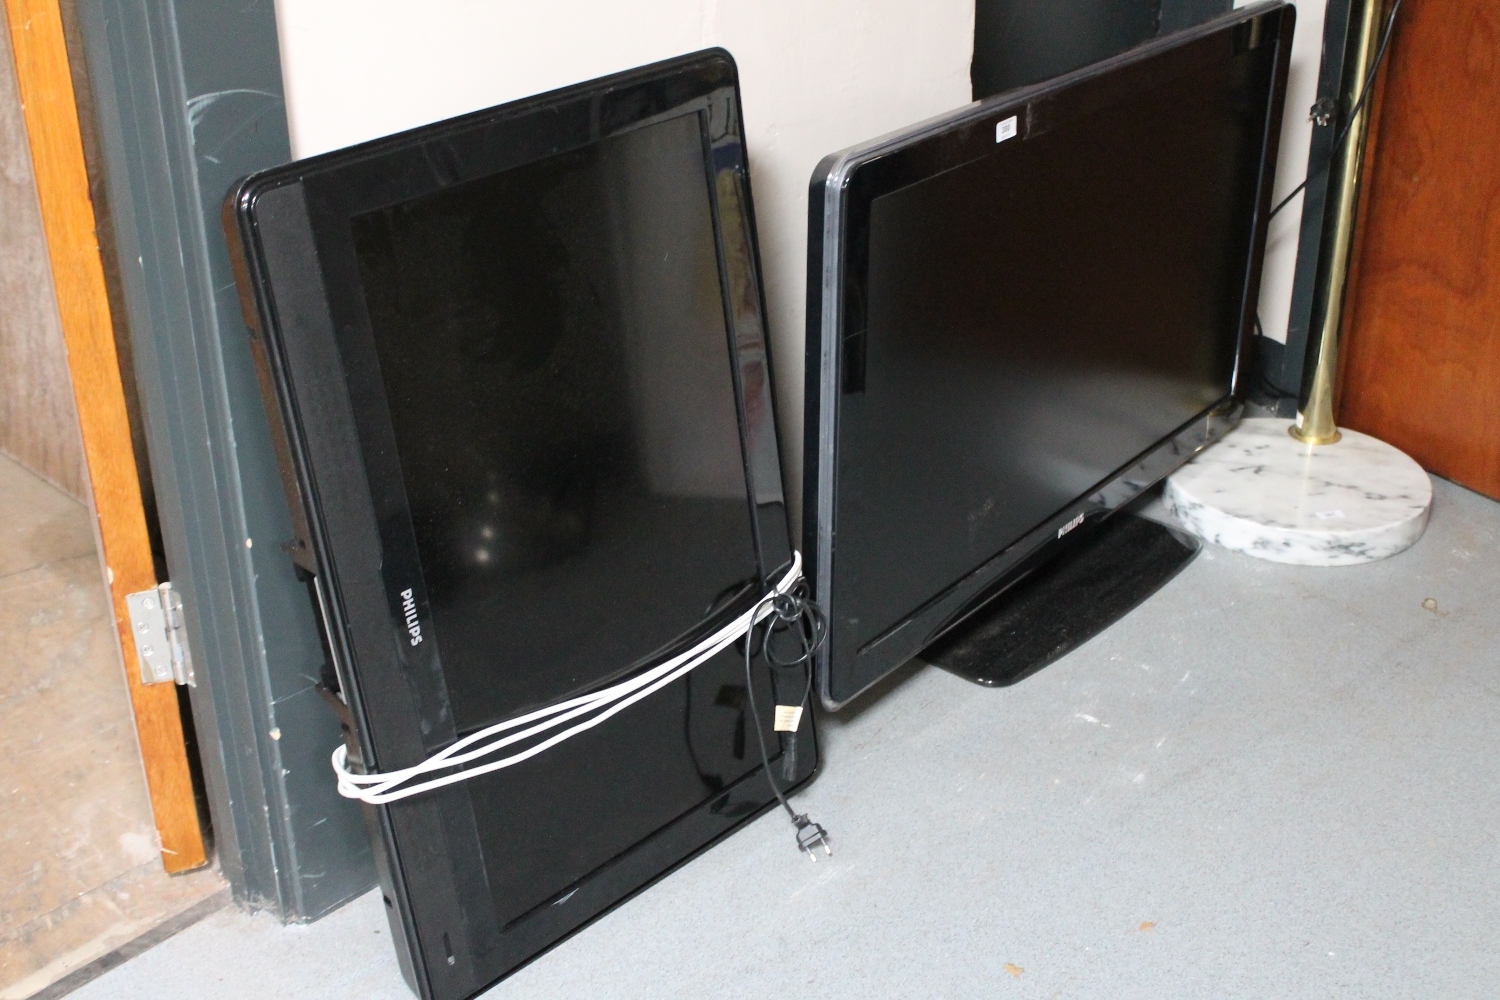 A Philips 42 inch LCD TV with 32 inch LCD TV (continental wiring and untested)